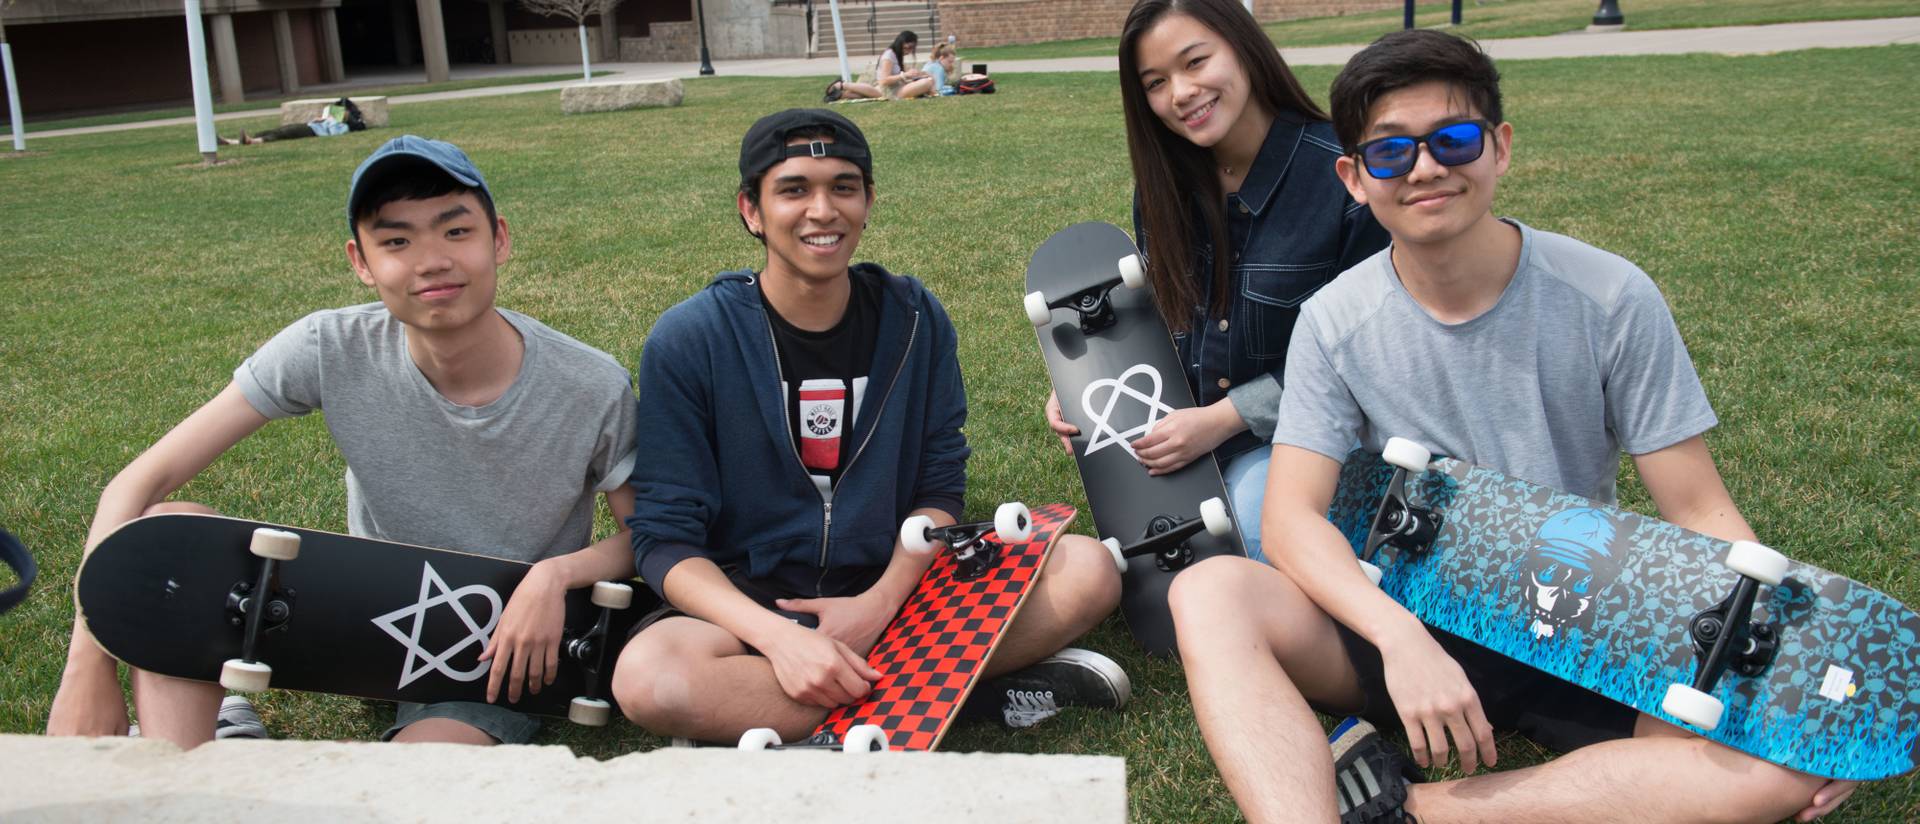 International students hanging out together with skateboards